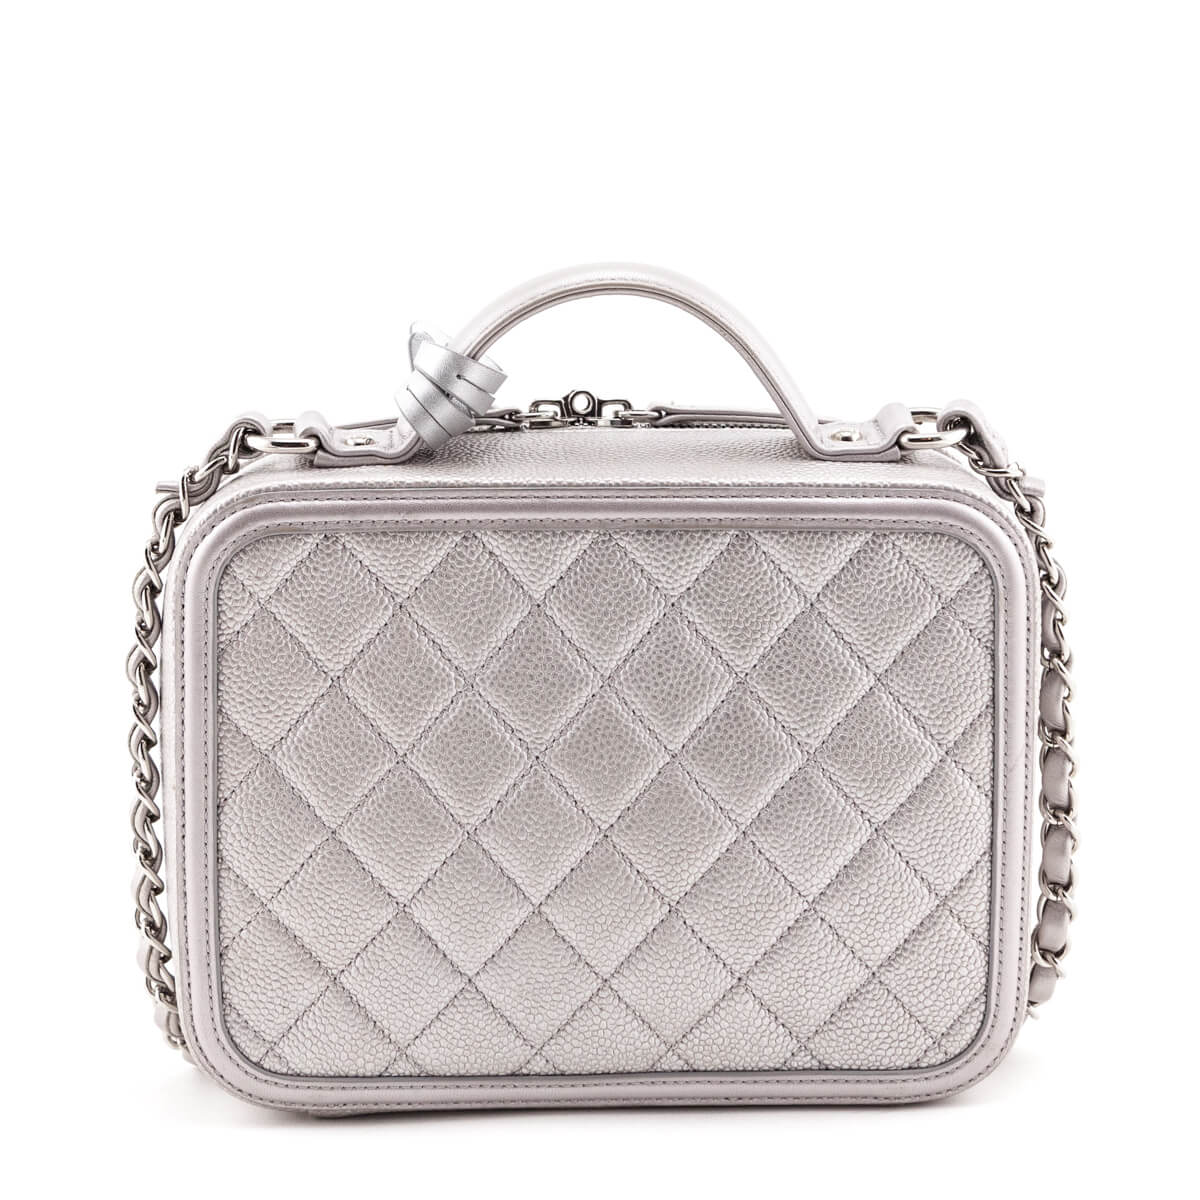 CHANEL VANITY CASE 20CM (2479xxxx) METALLIC SILVER CAVIAR LEATHER, WITH  CARD & BOX, NO DUST COVER